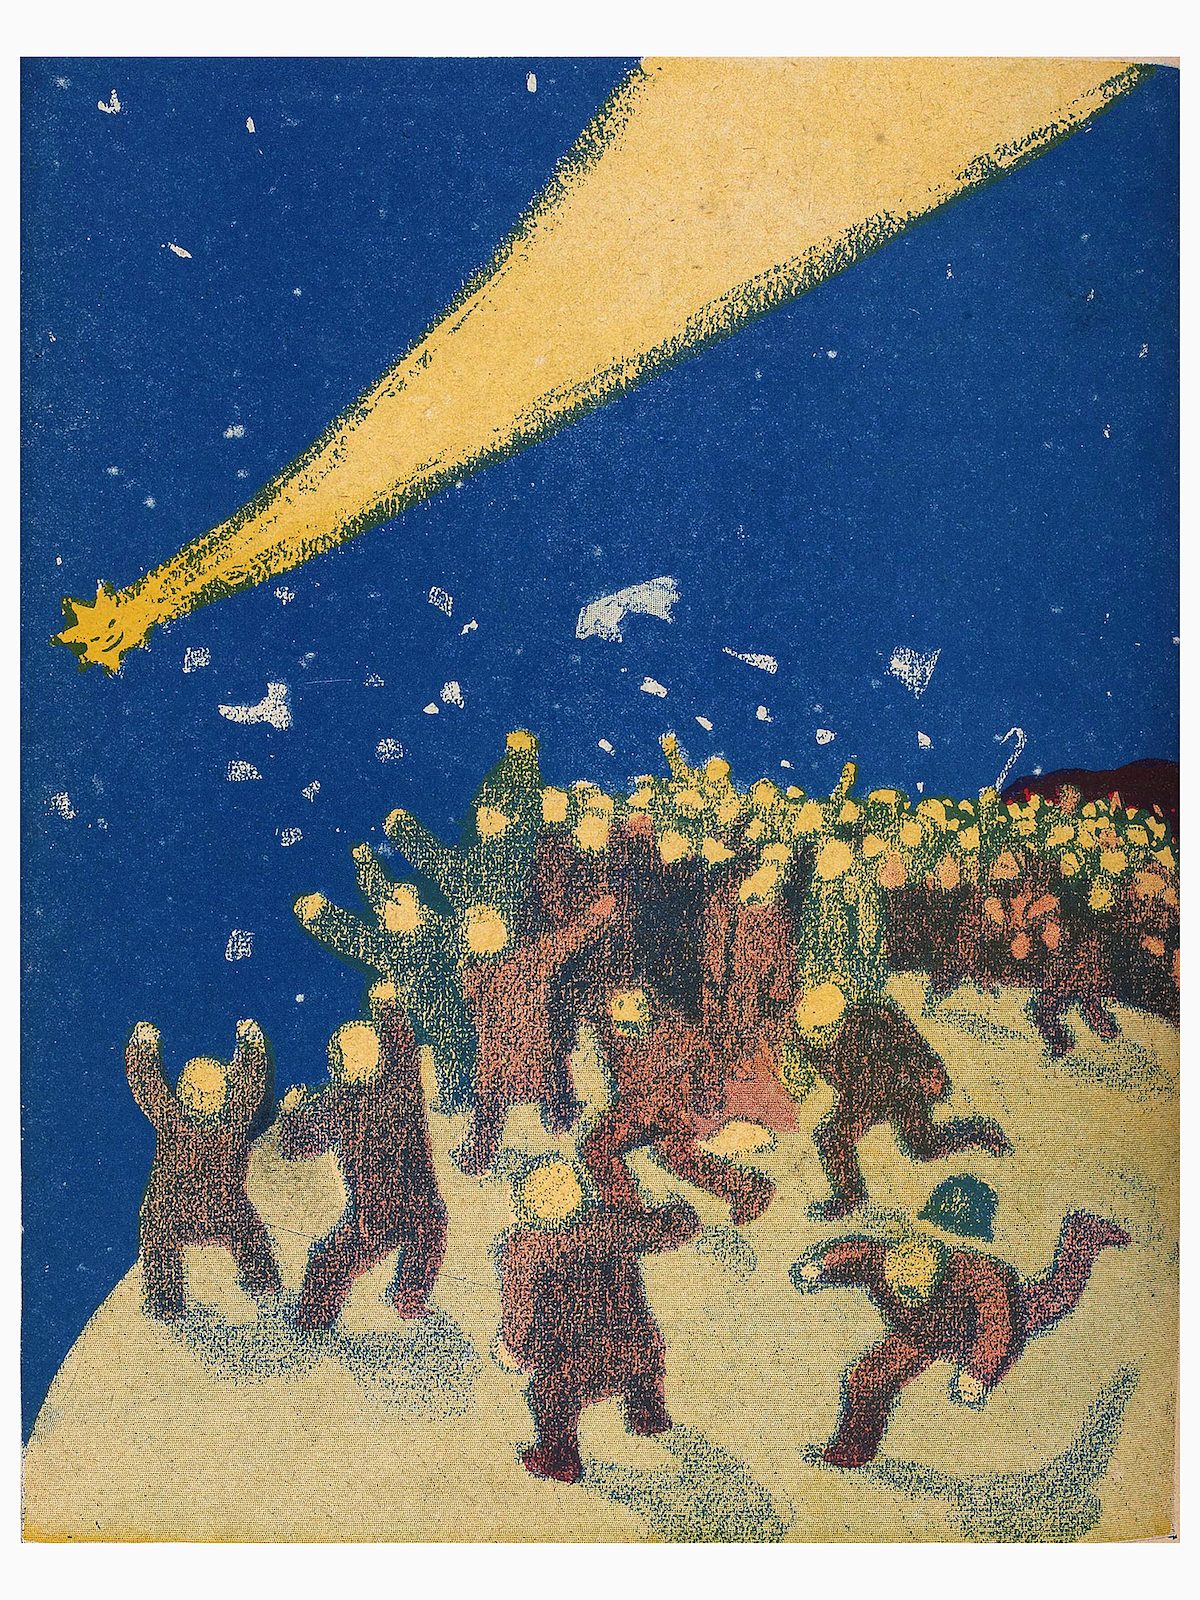 Comet , Illustration from French satirical magazine ‘L'Assiette au Beurre’, 1910. Artist Unknown